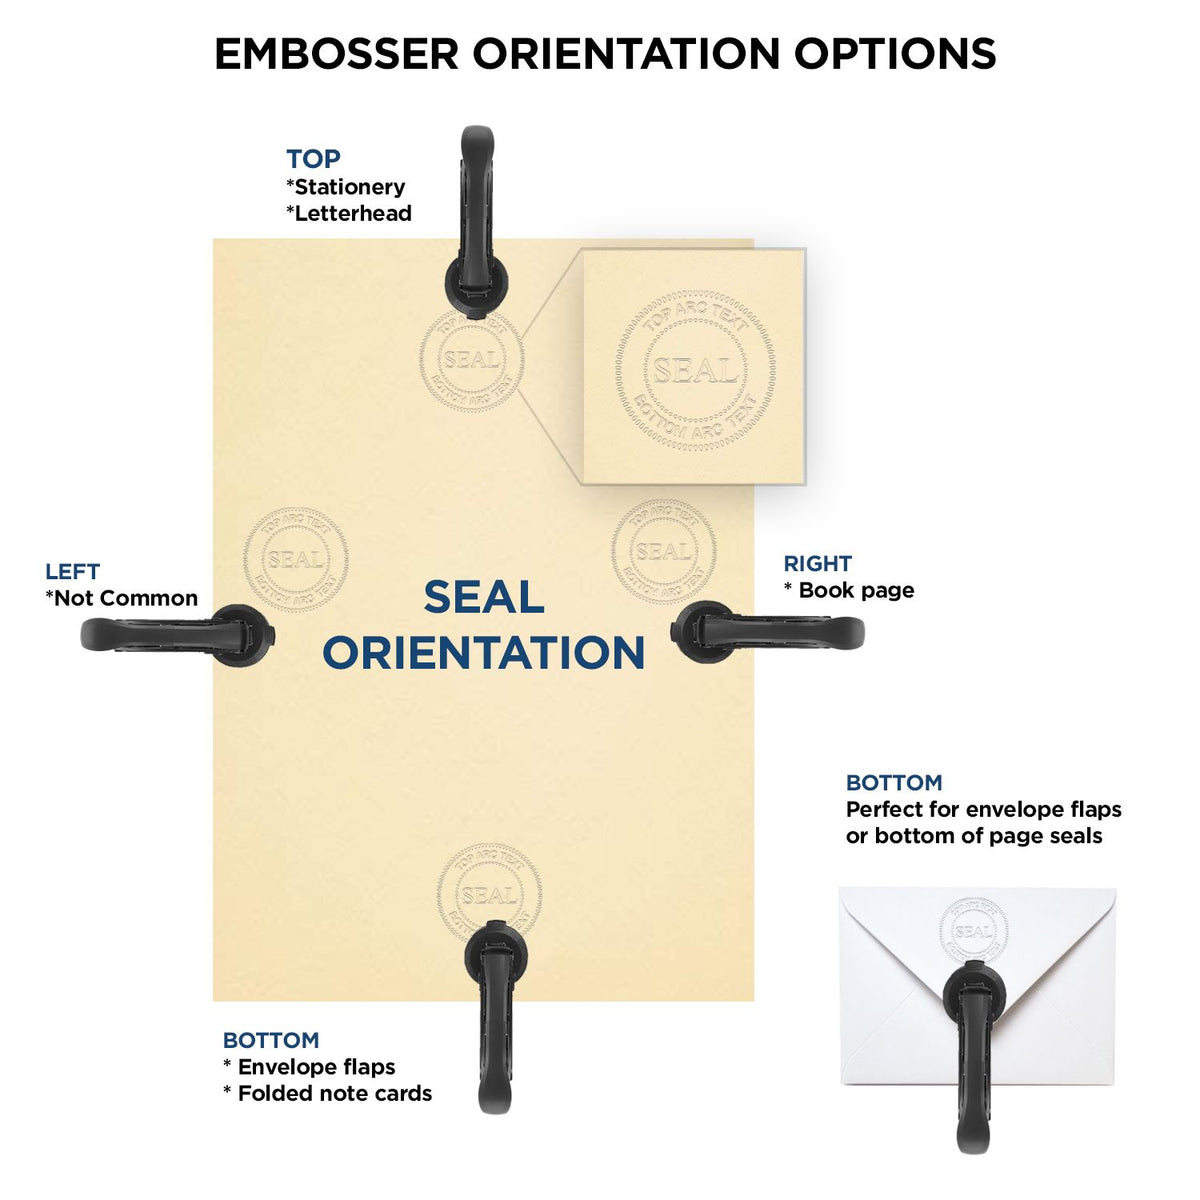 An infographic for the Handheld Alaska Professional Engineer Embosser showing embosser orientation, this is showing examples of a top, bottom, right and left insert.